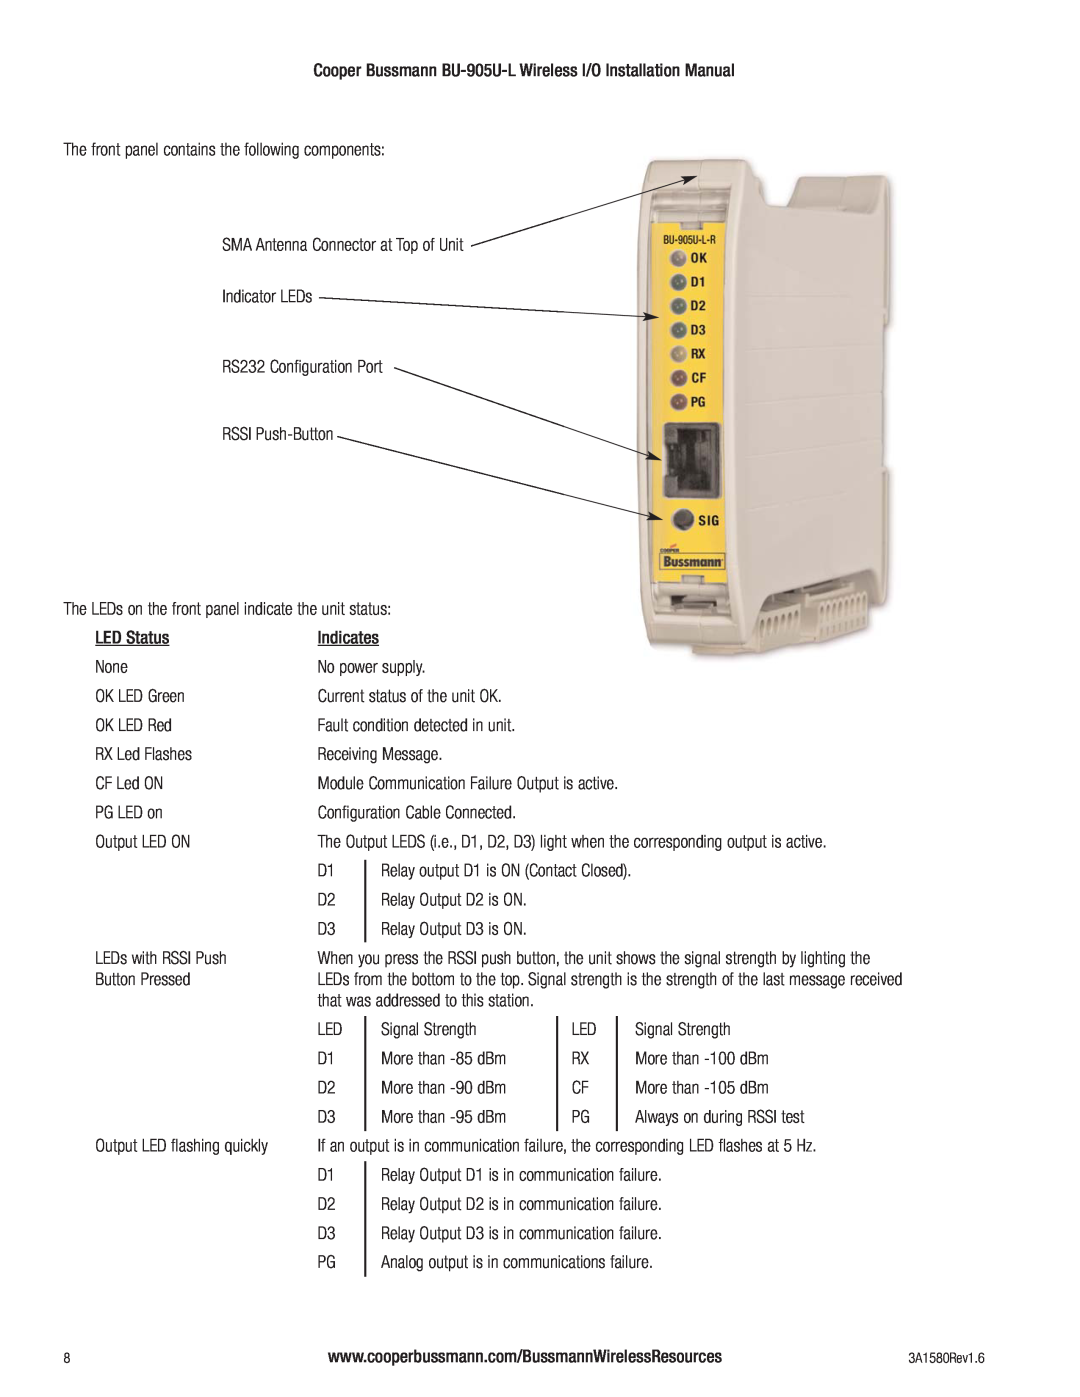 Cooper Bussmann BU-905U-L installation manual The front panel contains the following components 